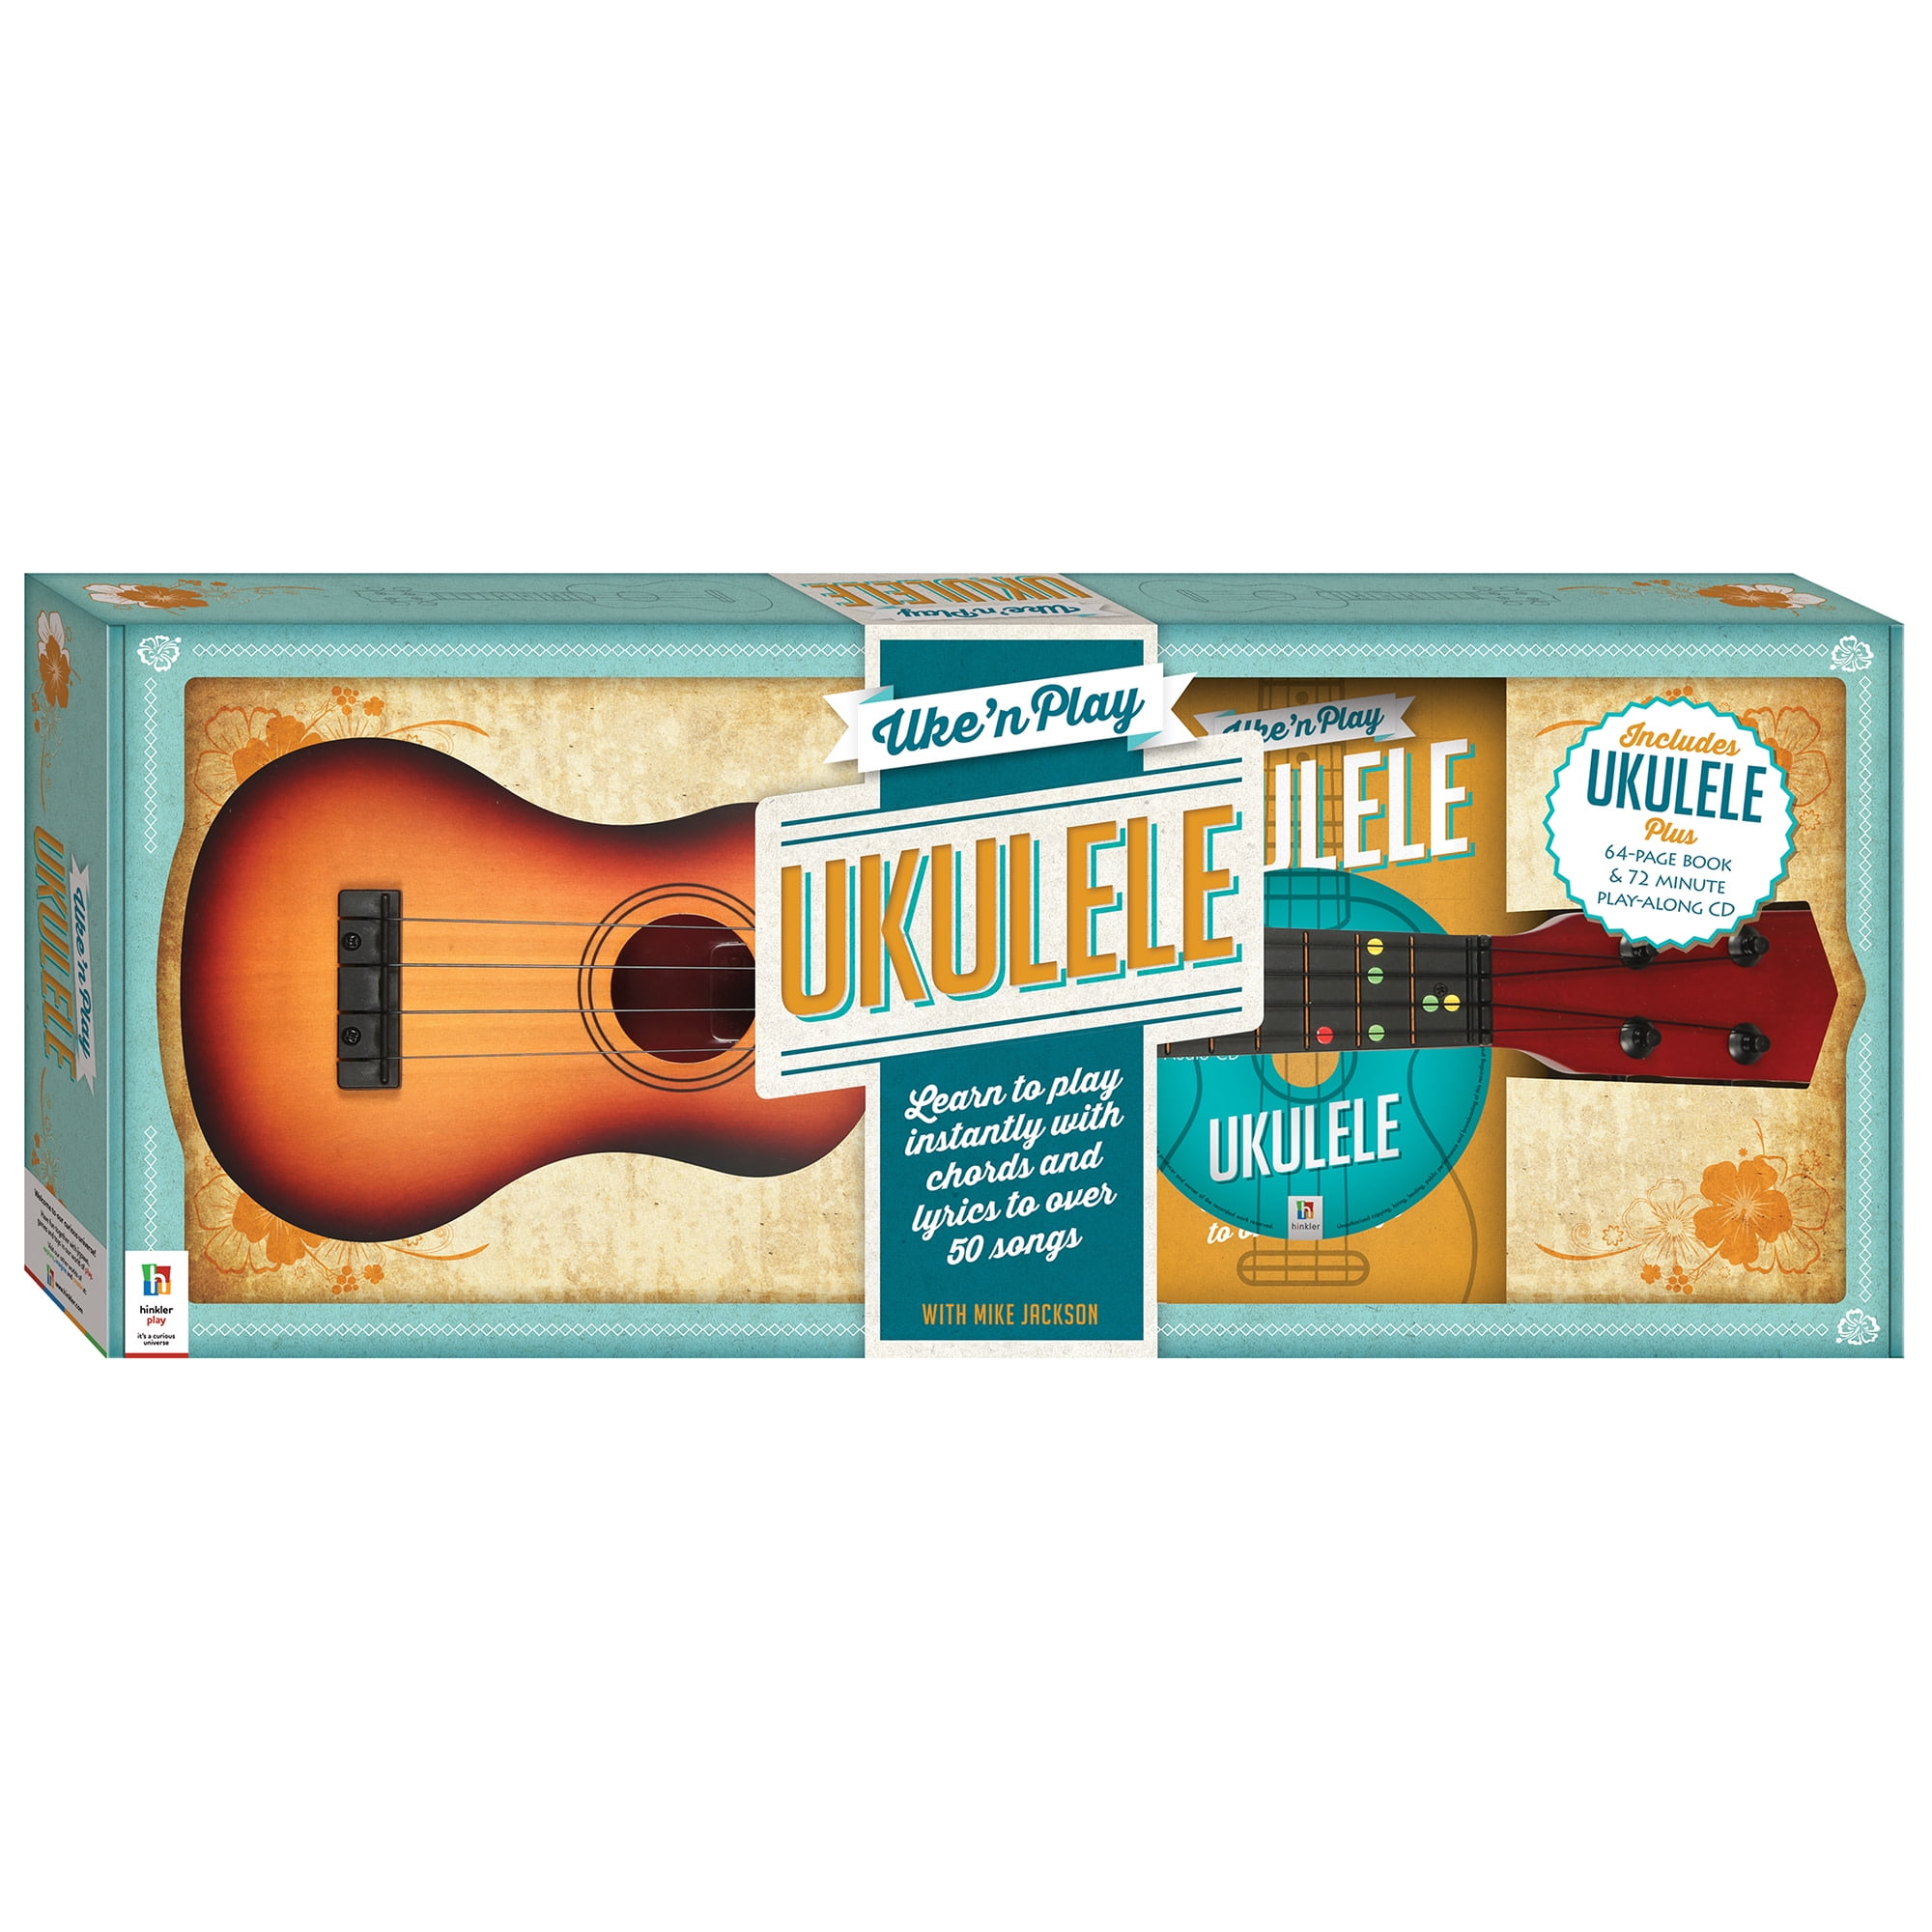 Play: Ukulele Kit - Learn How to Play Ukulele Home, Comes with Specially Made Ukulele - For Beginners and Experts - CD Included with and Songs - Learning Music